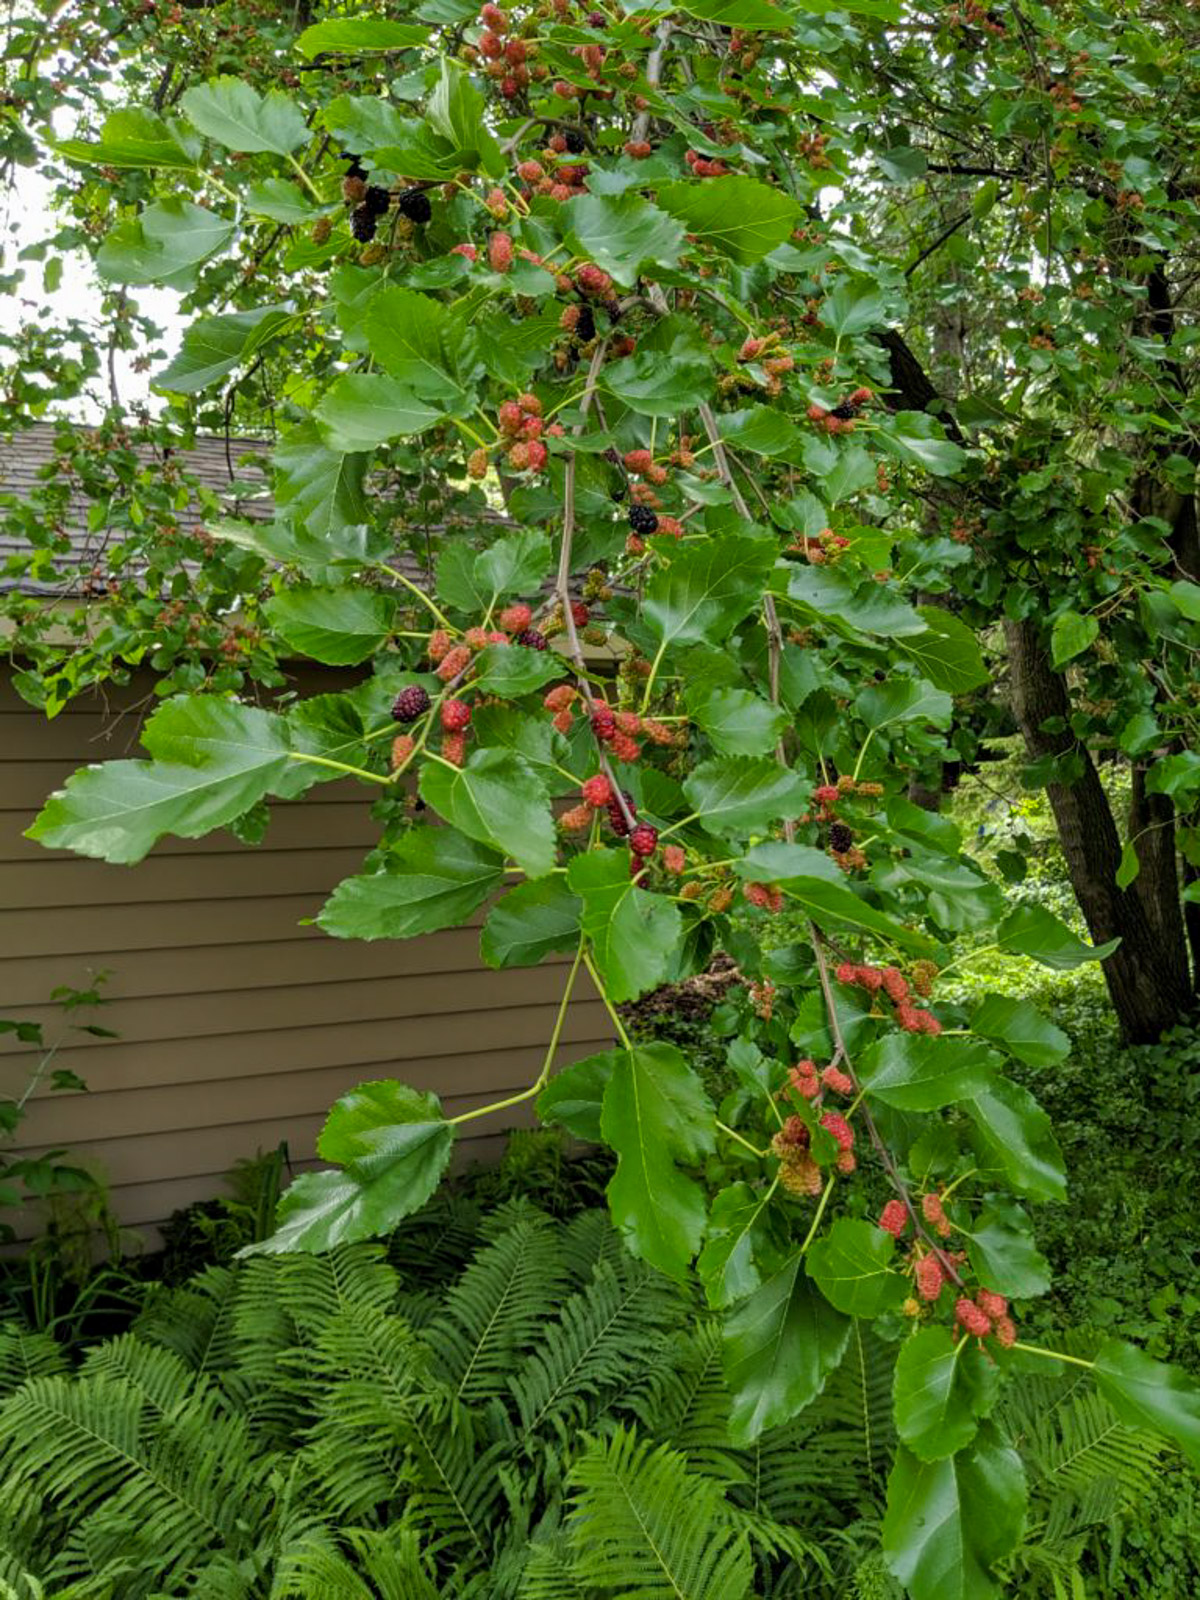 Mulberries ripening on the tree.